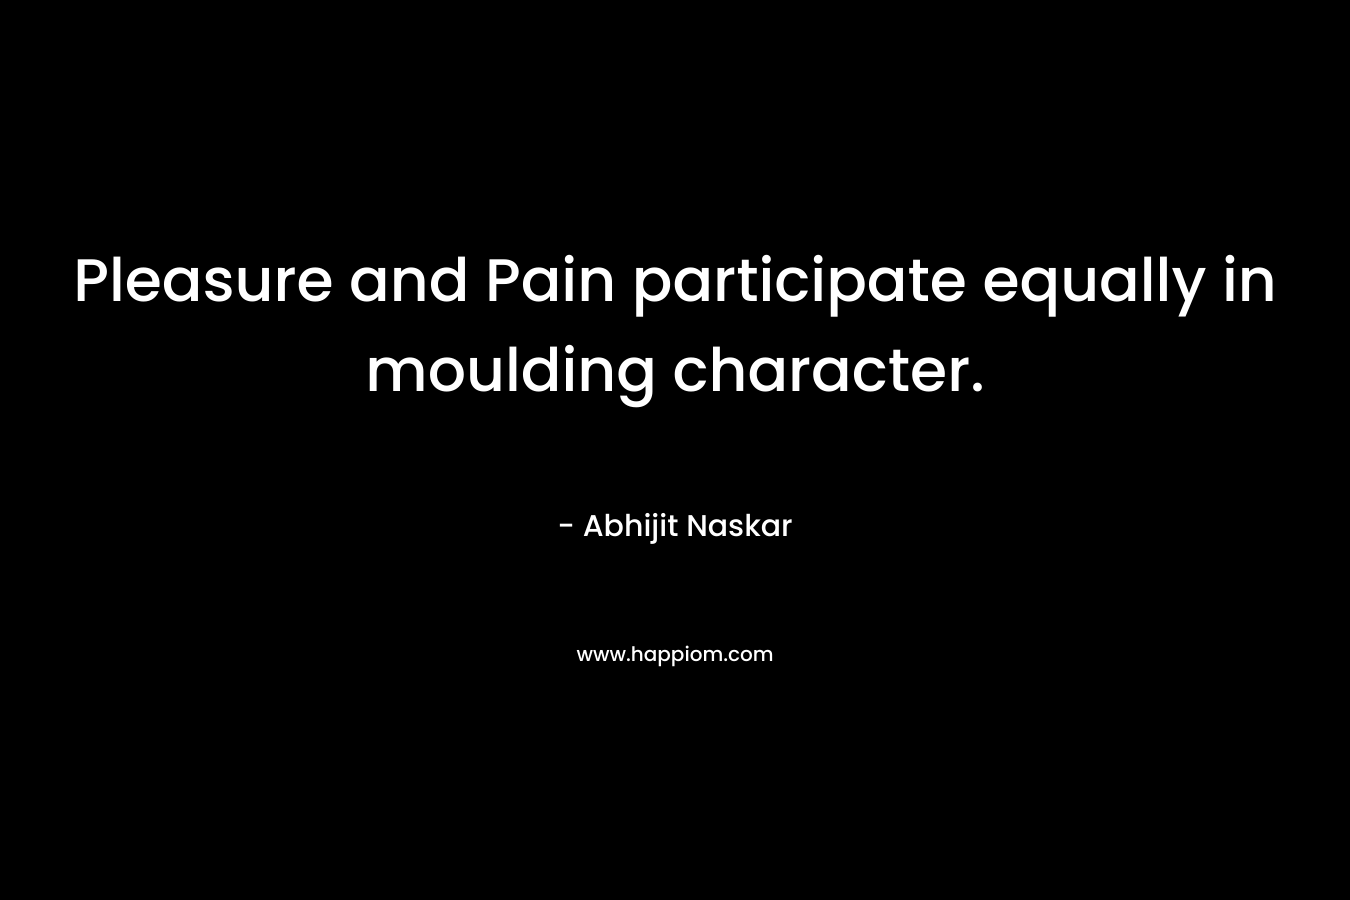 Pleasure and Pain participate equally in moulding character.